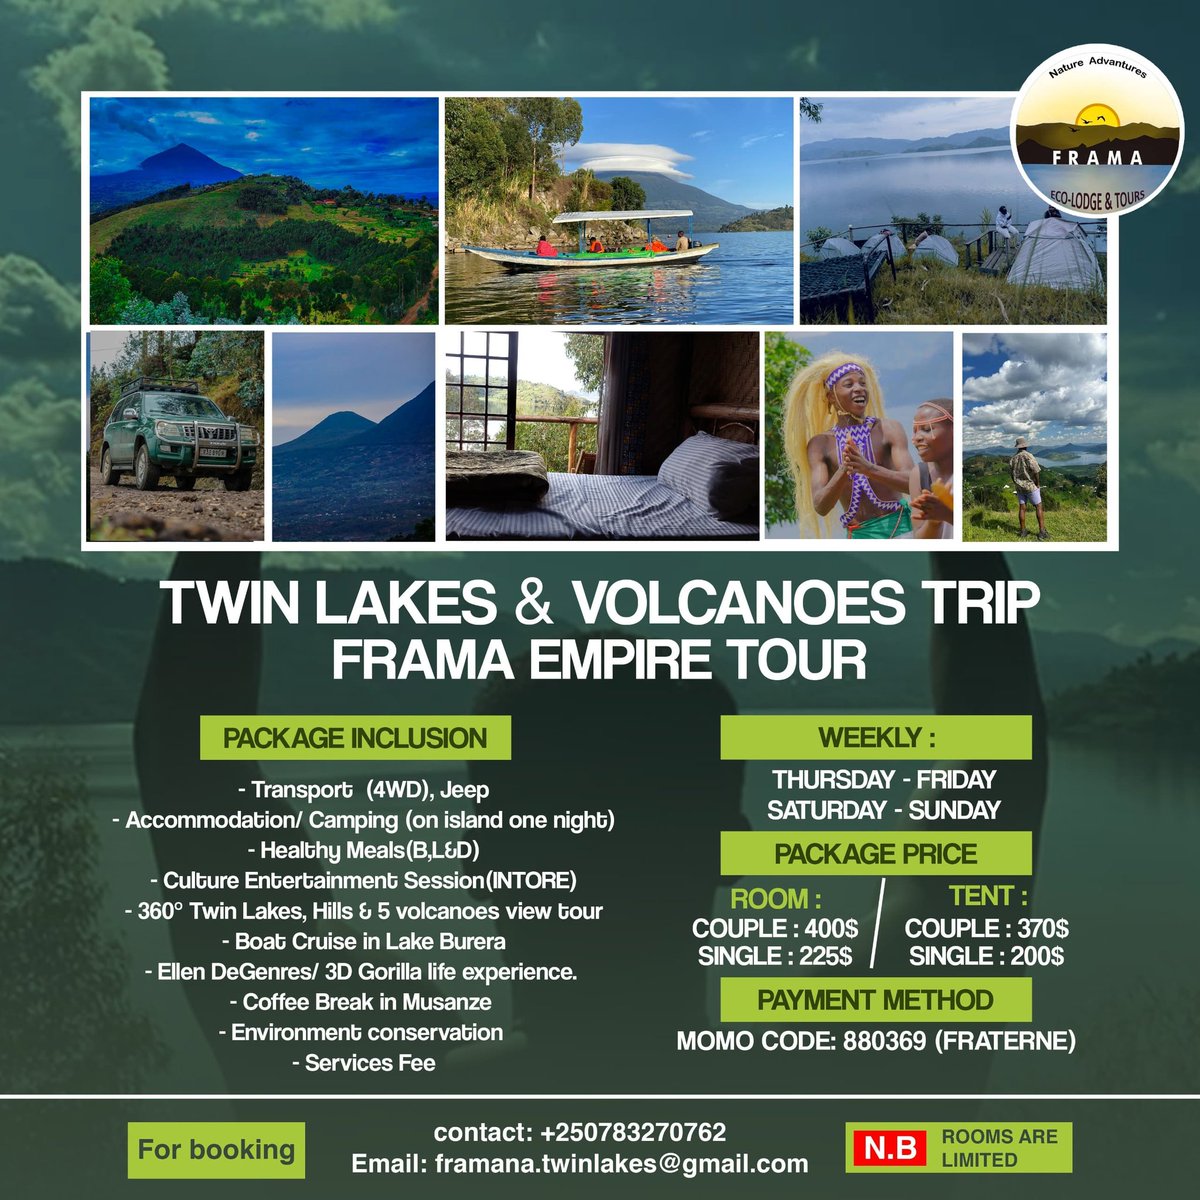 Are you in or Traveling to Rwanda? Don't miss! Discover and enjoy. Book your tour for a GOOD night on island and under the stars, with TWO great days moments of discovering hidden gems in volcanoes, Twin Lakes and green hills in the northern of Rwanda. Seats are limited ❤️👌